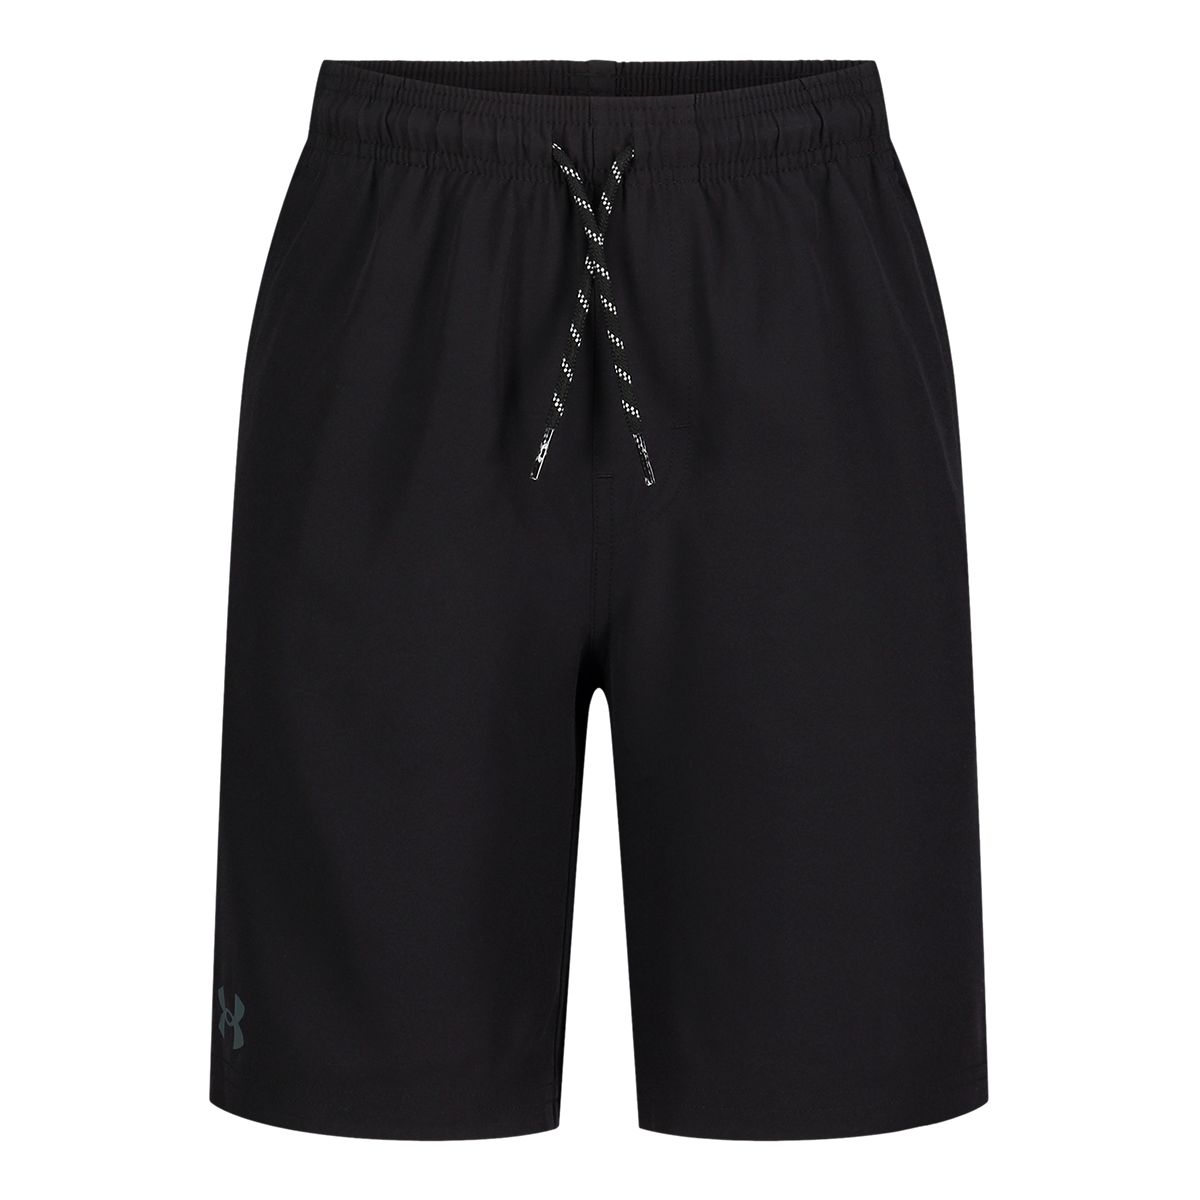 Image of Under Armour Boys' OD Stretch Shorts